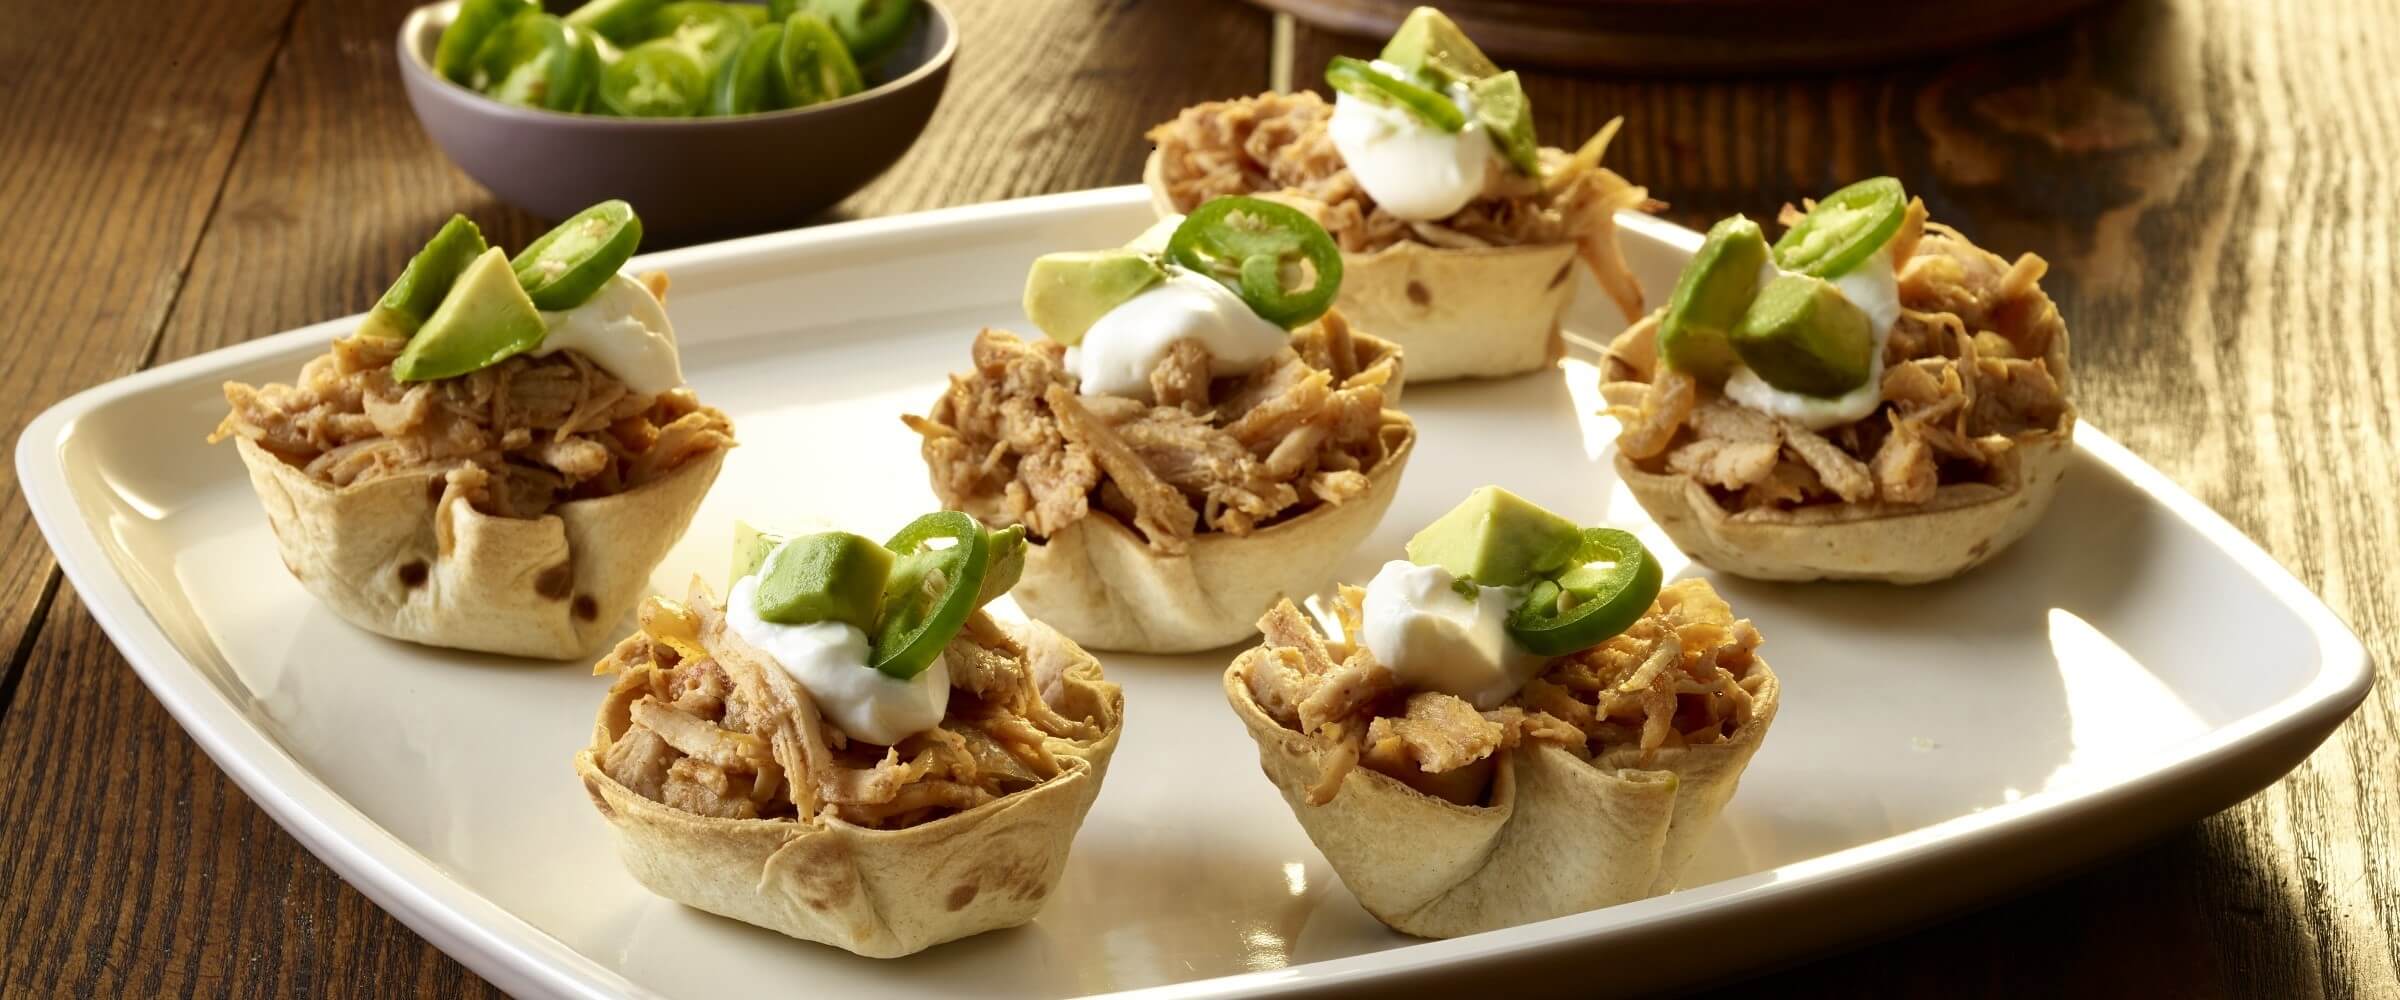 pulled pork wontons topped with sour cream, jalapenos and avocado on white plate